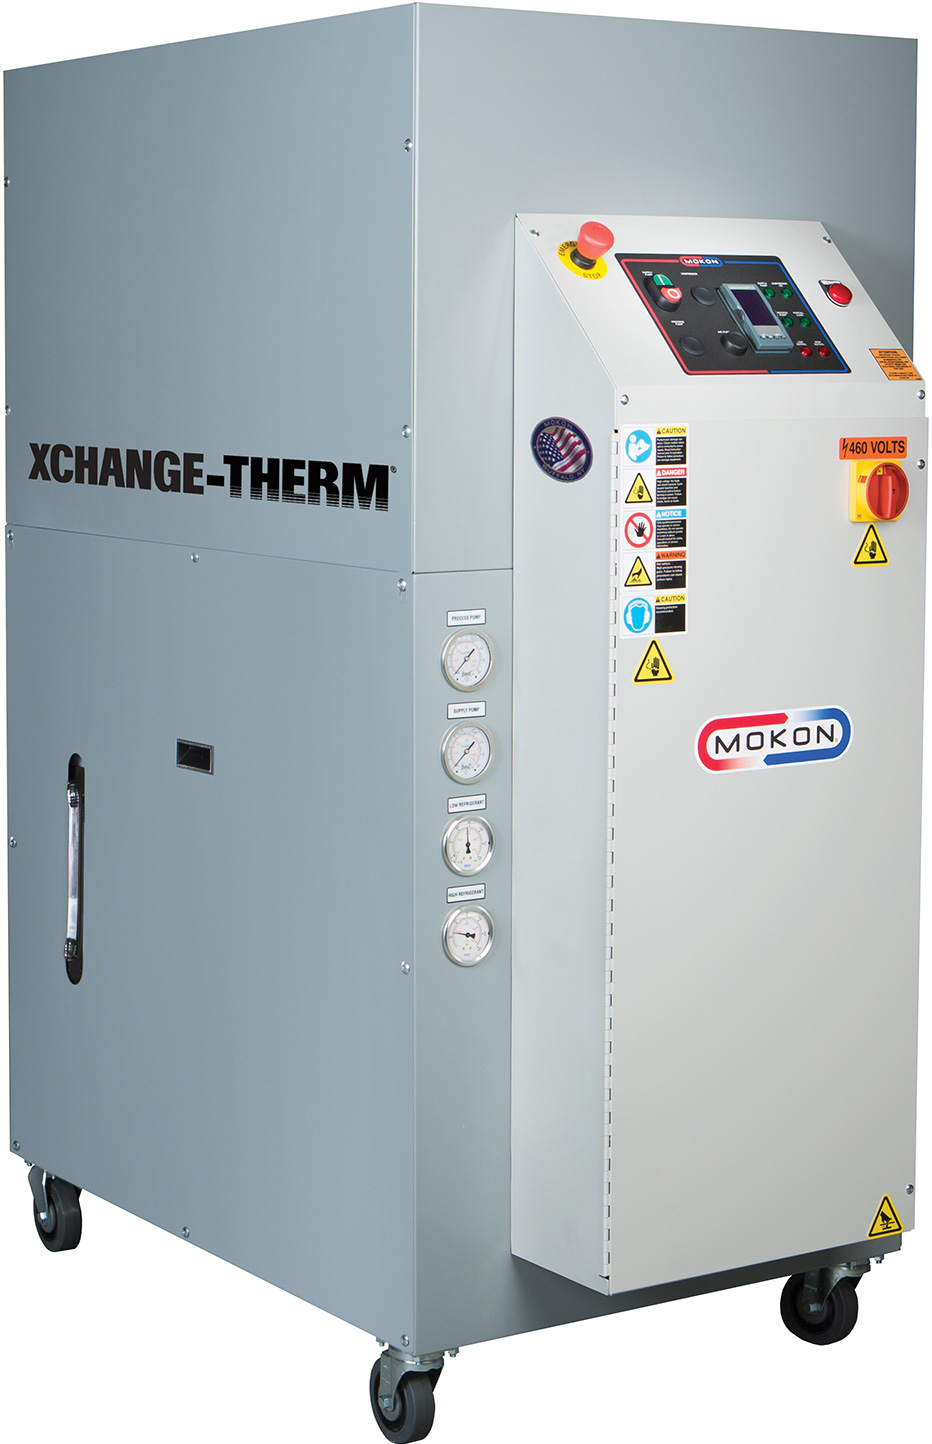 Xchange-Therm Heating & Chilling System